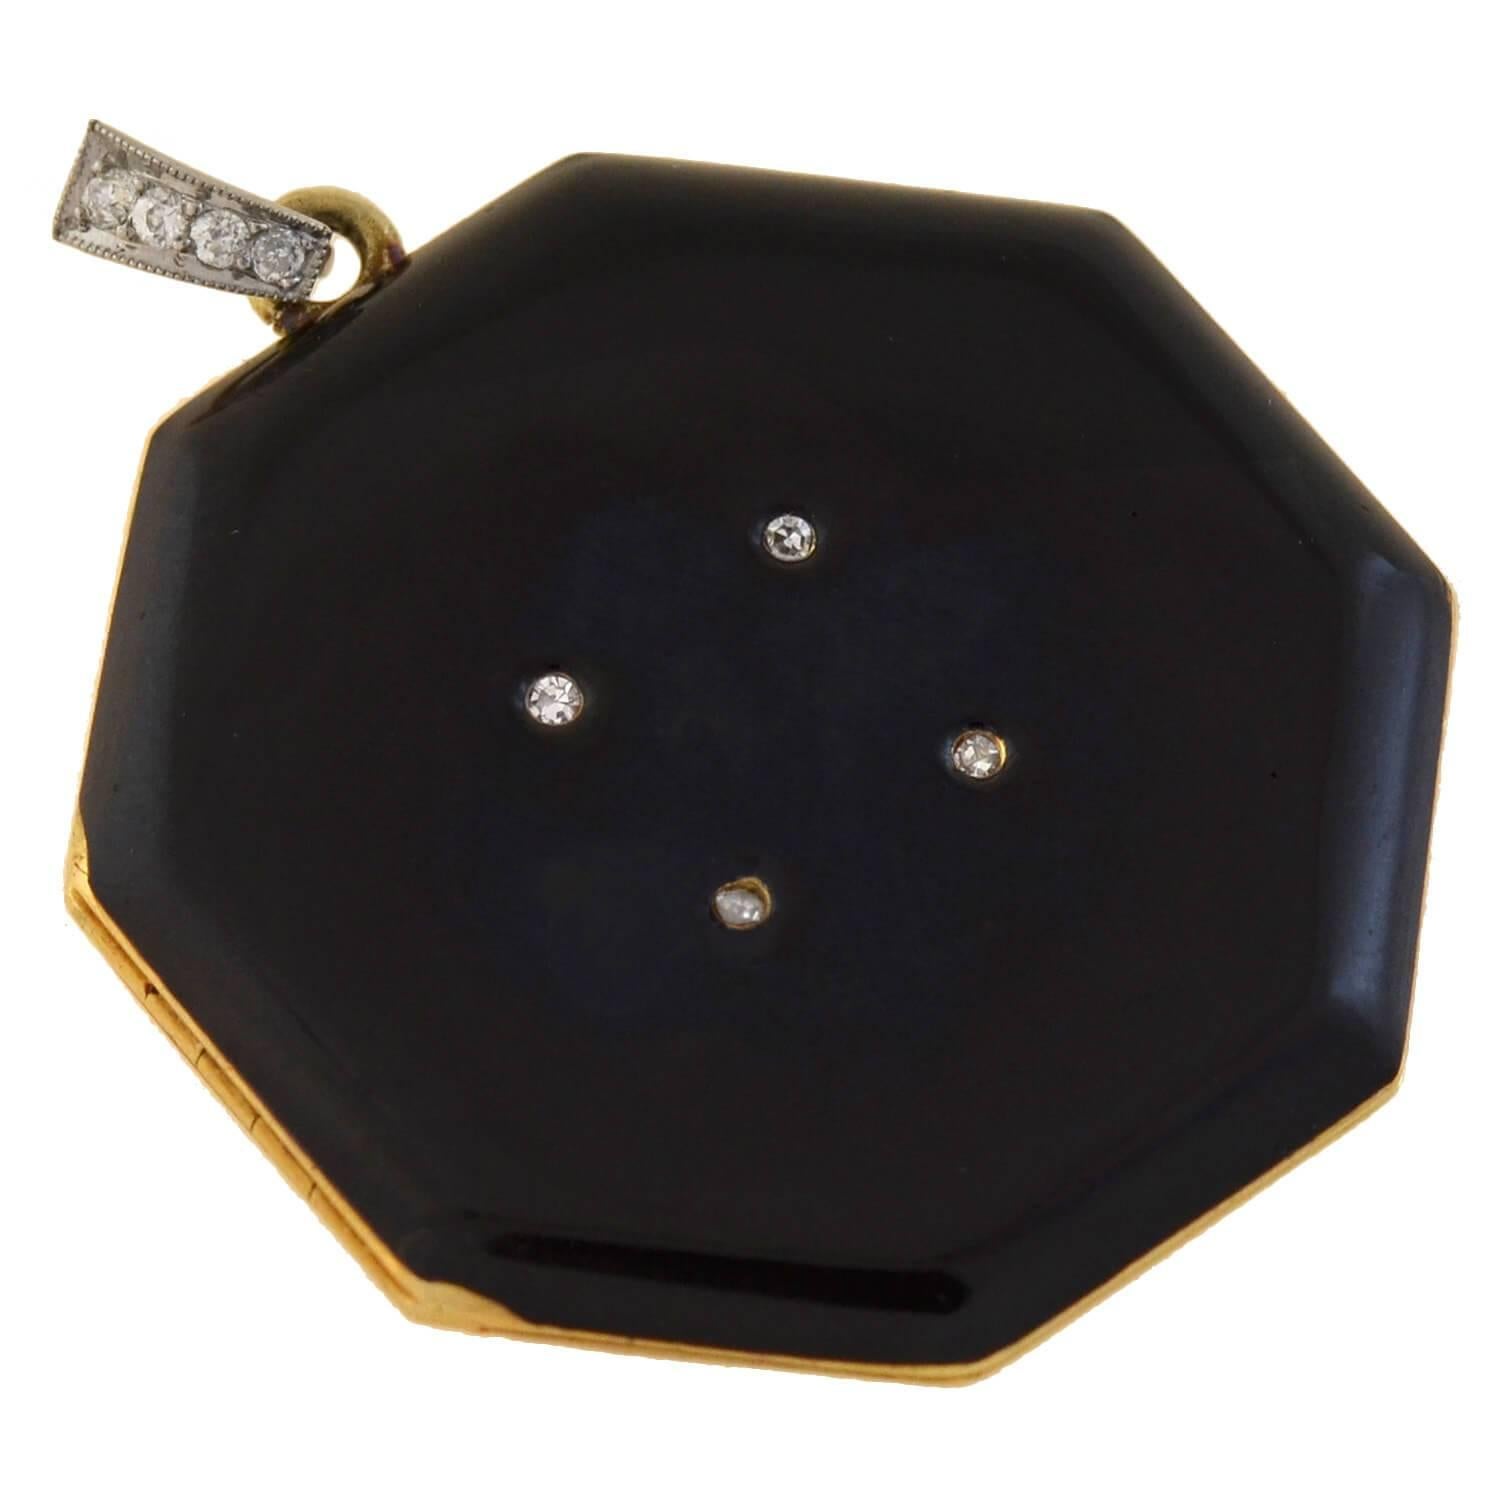 A gorgeous Edwardian era (ca1910) locket from legendary designer Tiffany & Co.! This octagonal-shaped piece is crafted in 14kt yellow gold and adorns glossy black enamel on both sides. Four single cut diamonds are set in a square formation at the